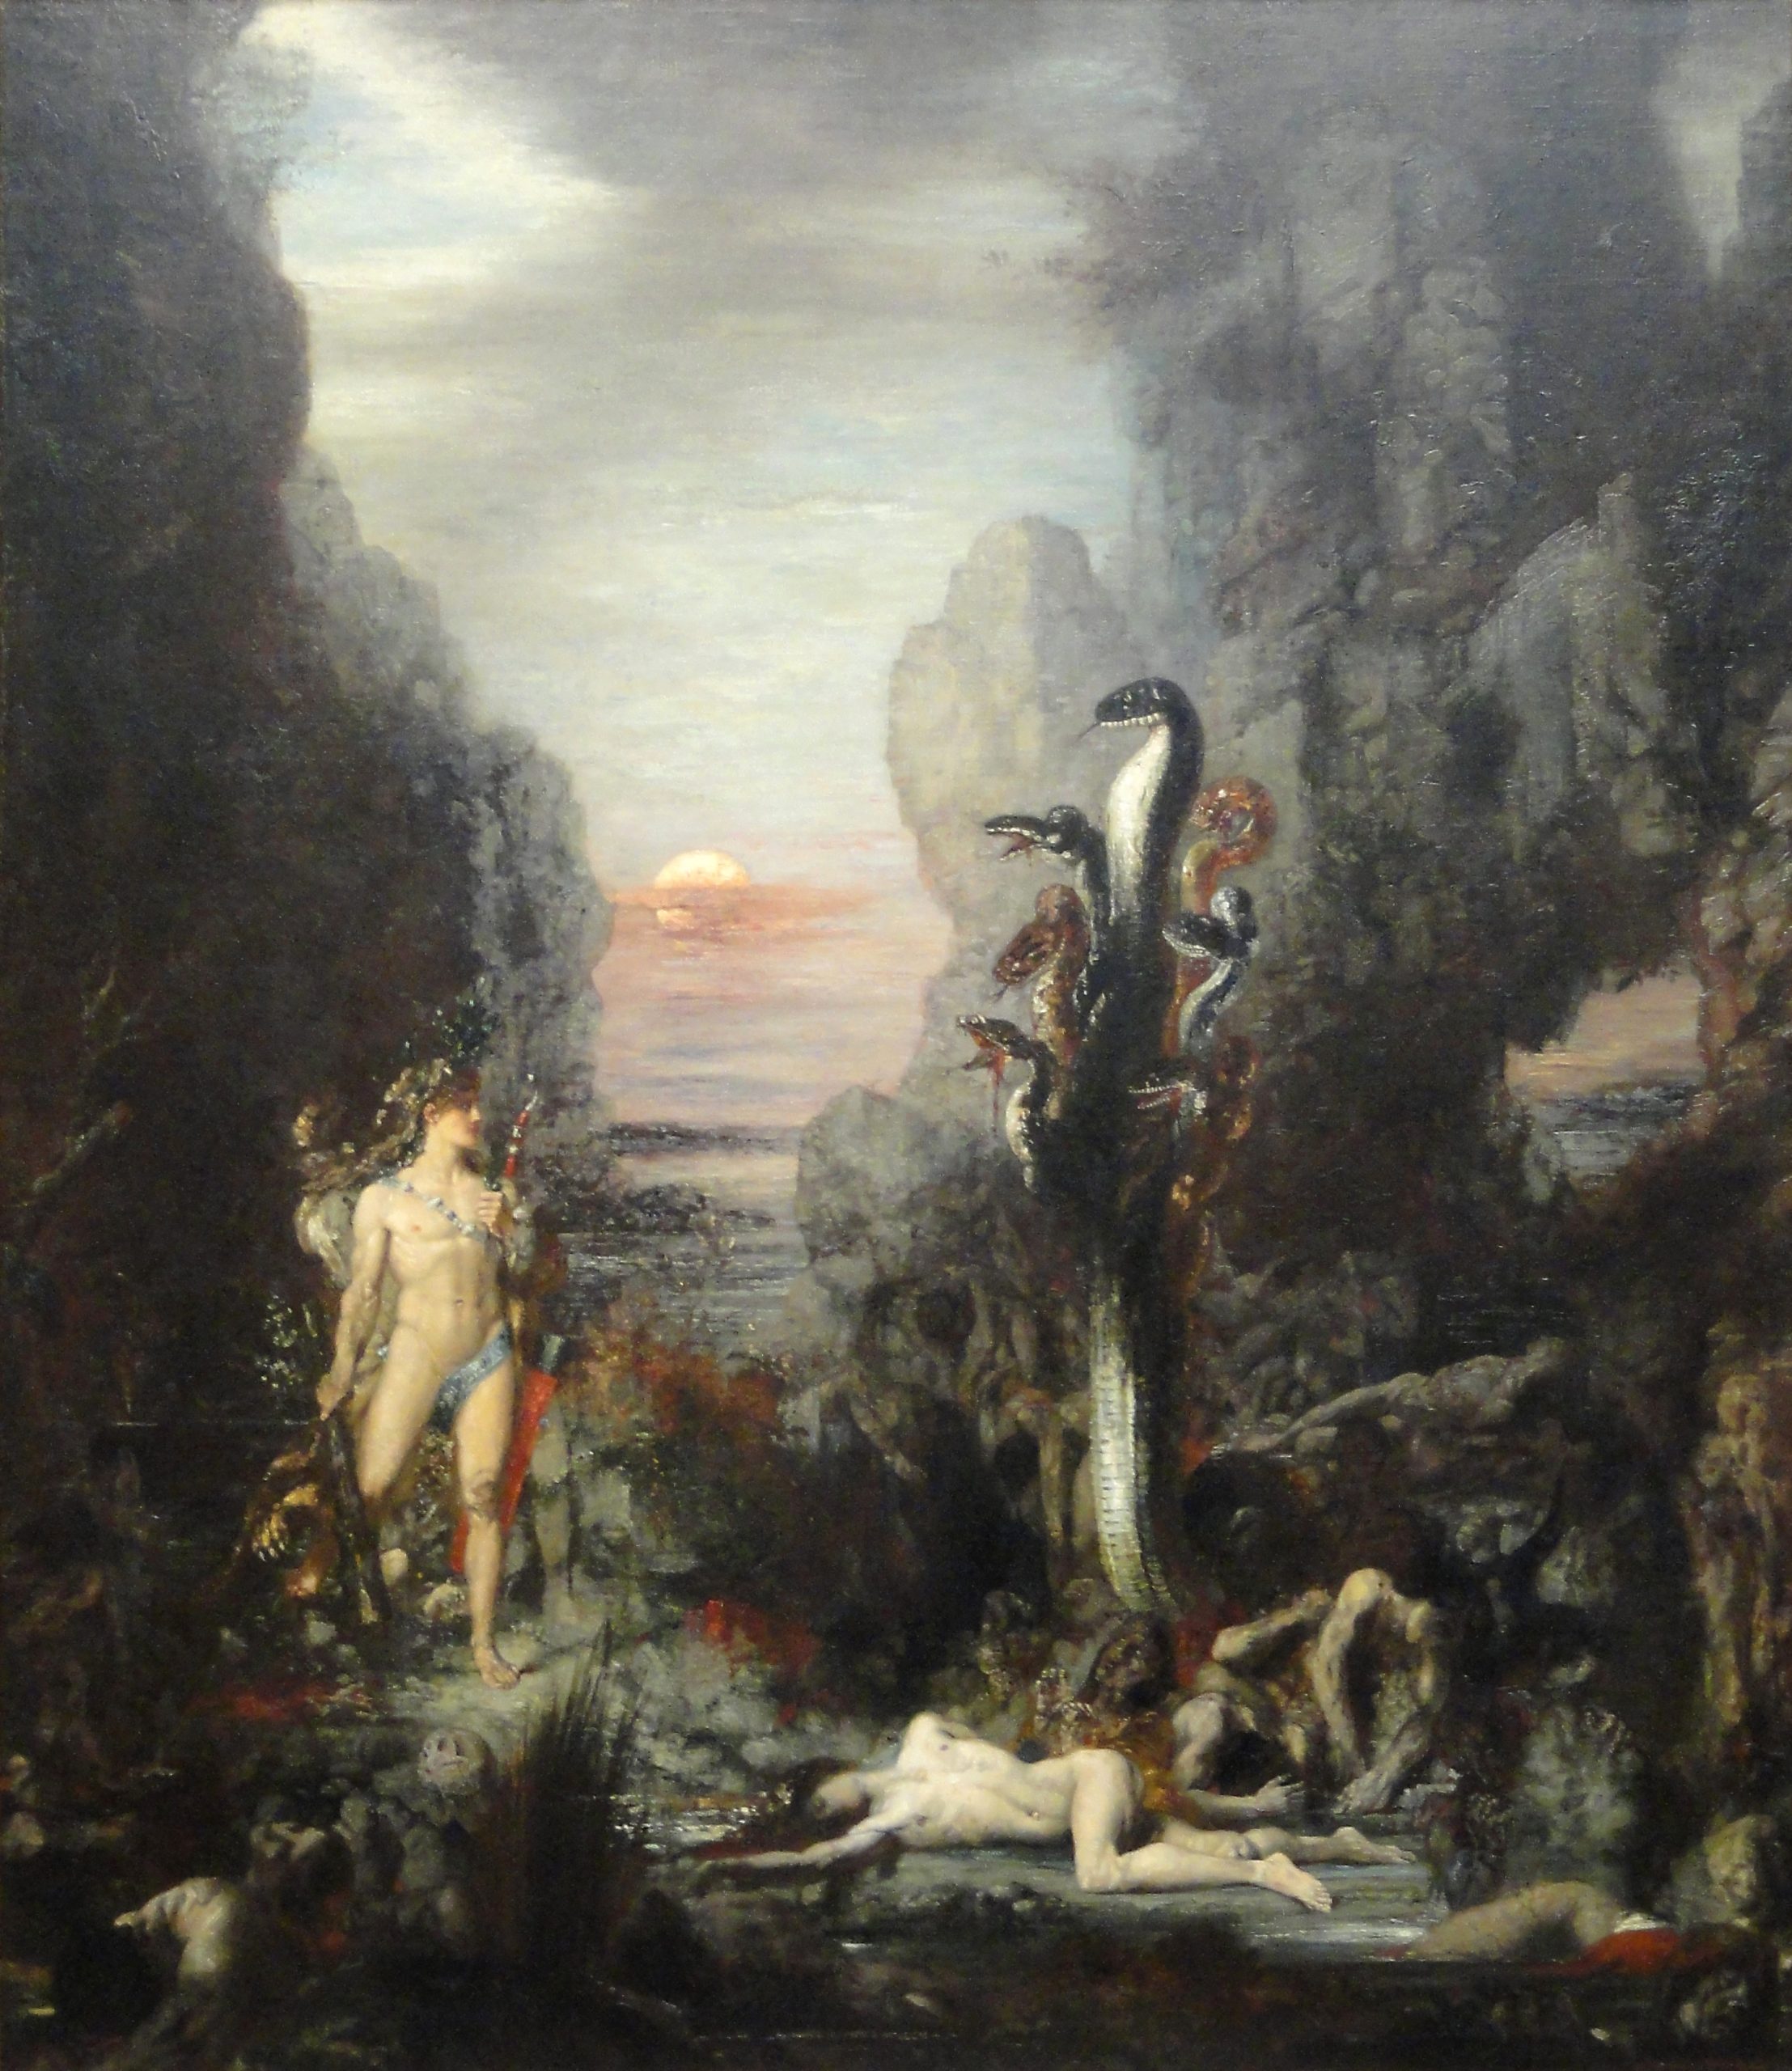 A painting of a nude figure stares towards several standing snakes with a rocky and cloudy landscape.